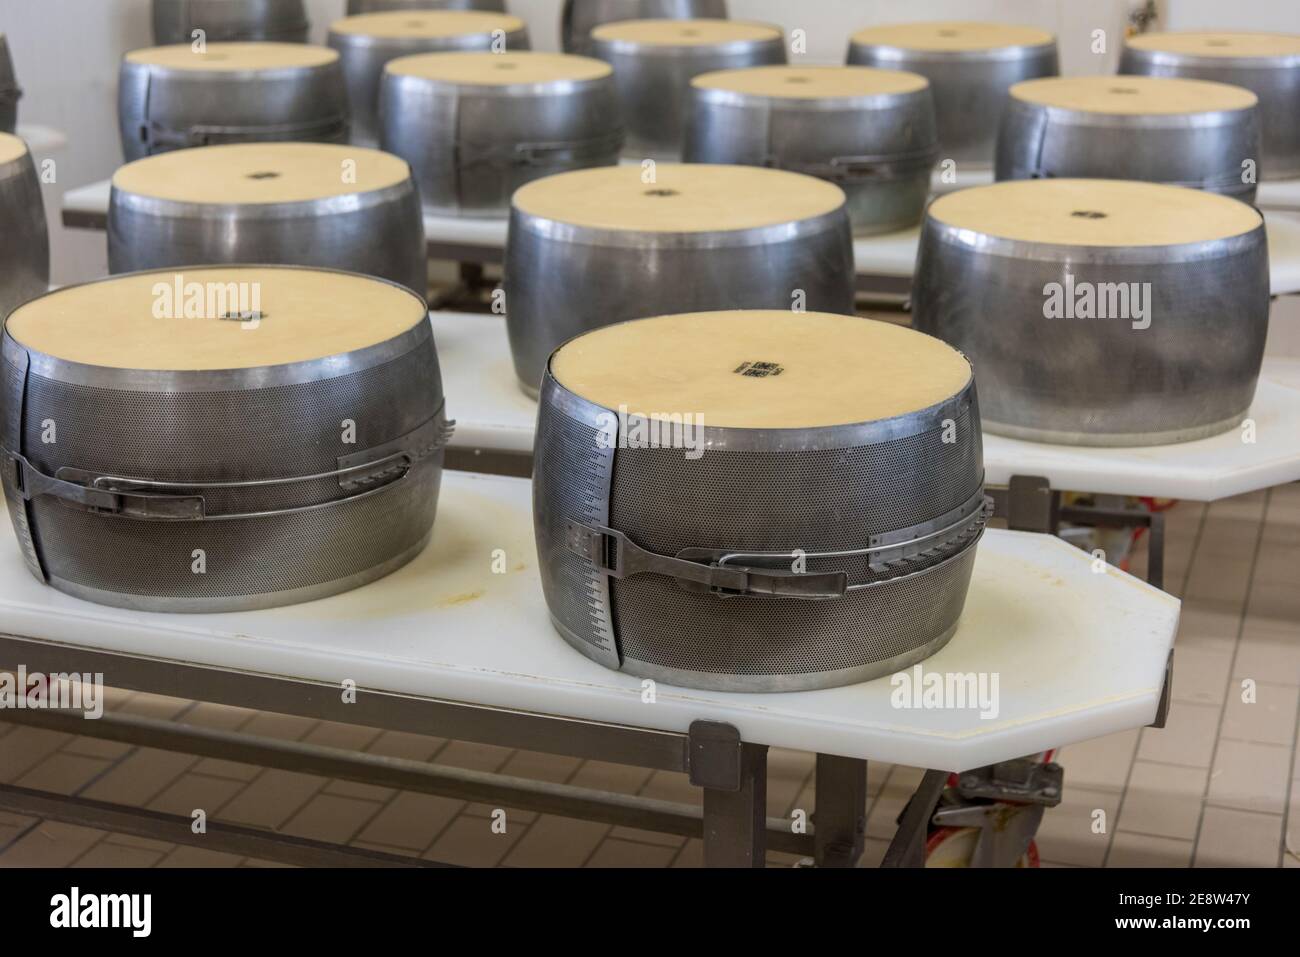 Parmigiano reggiano cheese in metal moulds to shape it into rounds ready for it to be stored and matured in Bologna Italy Stock Photo